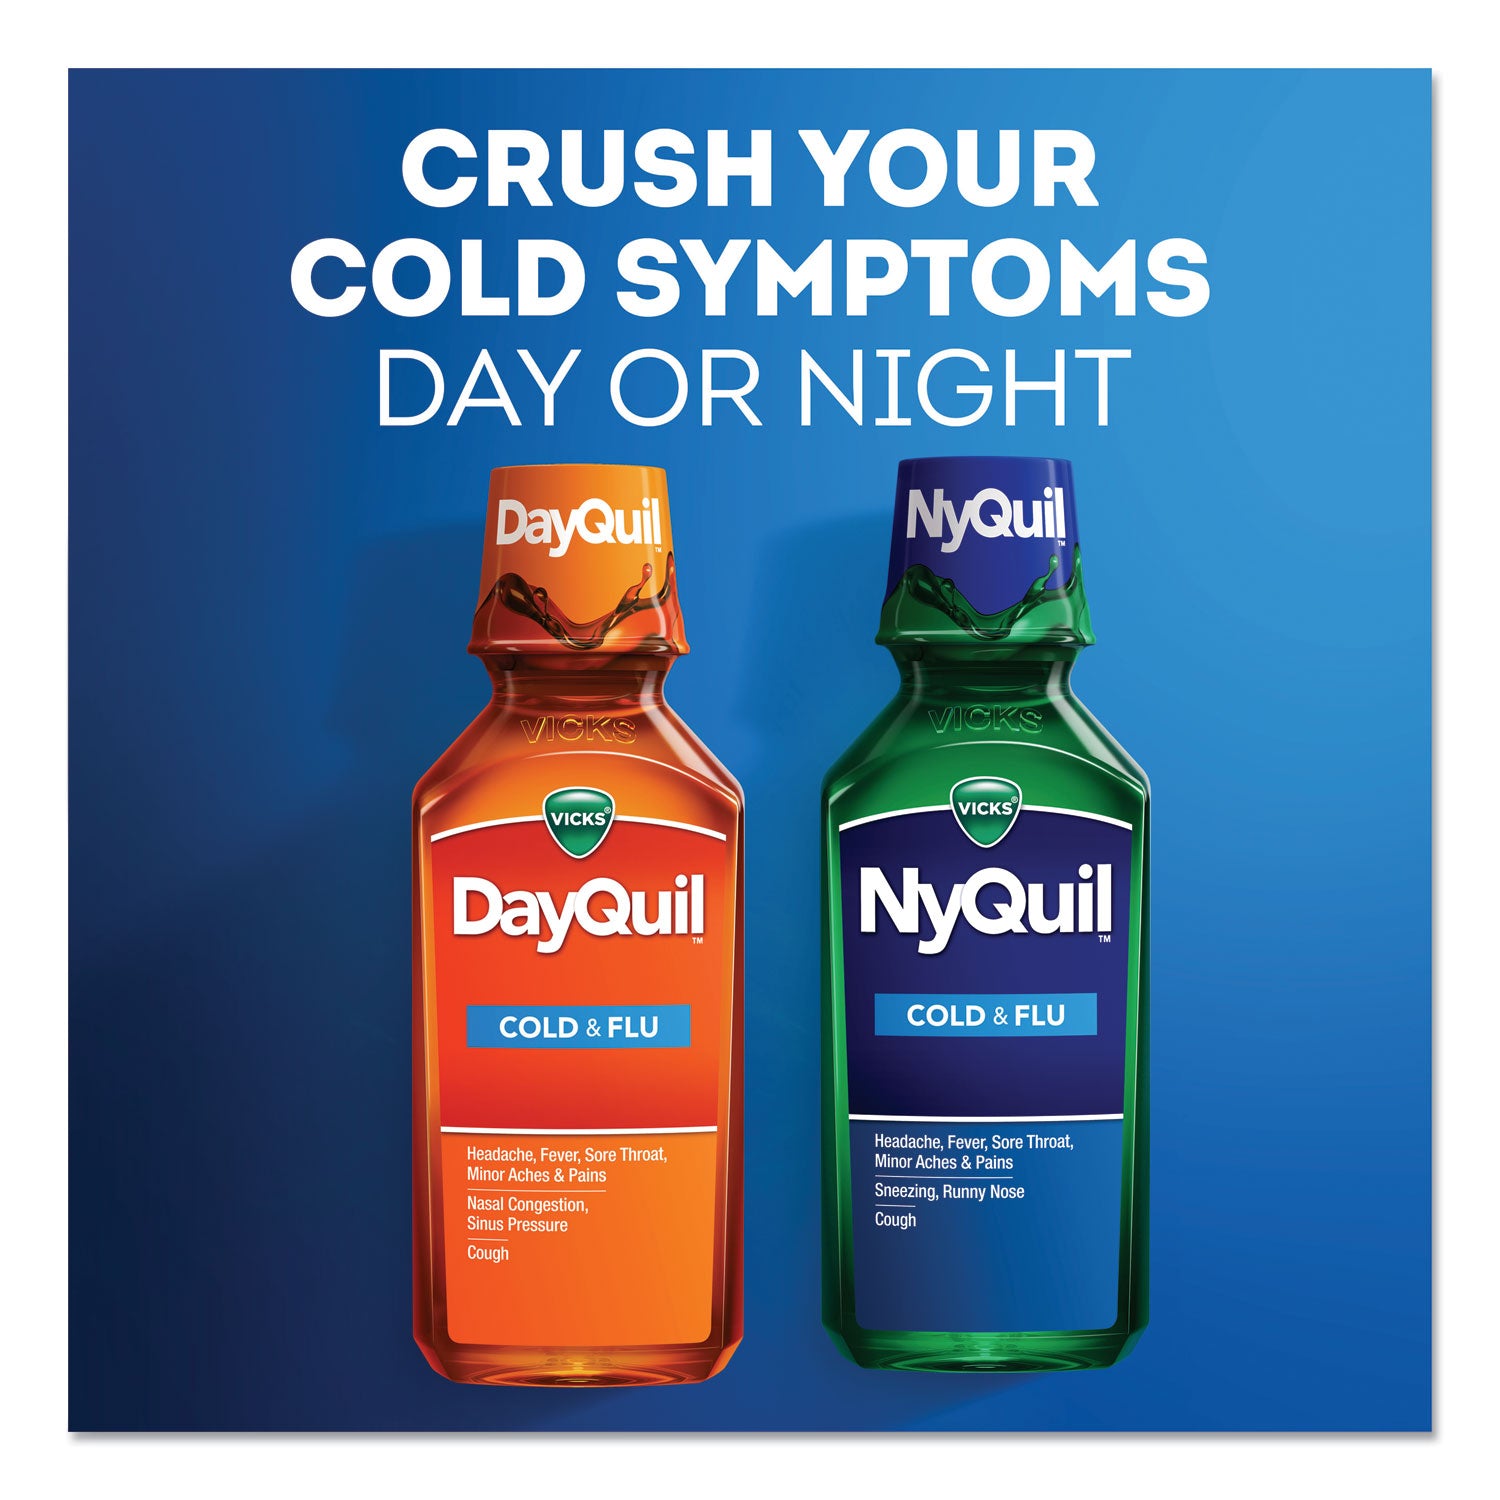 nyquil-cold-and-flu-nighttime-liquid-12-oz-bottle-12-carton_pgc01426 - 8